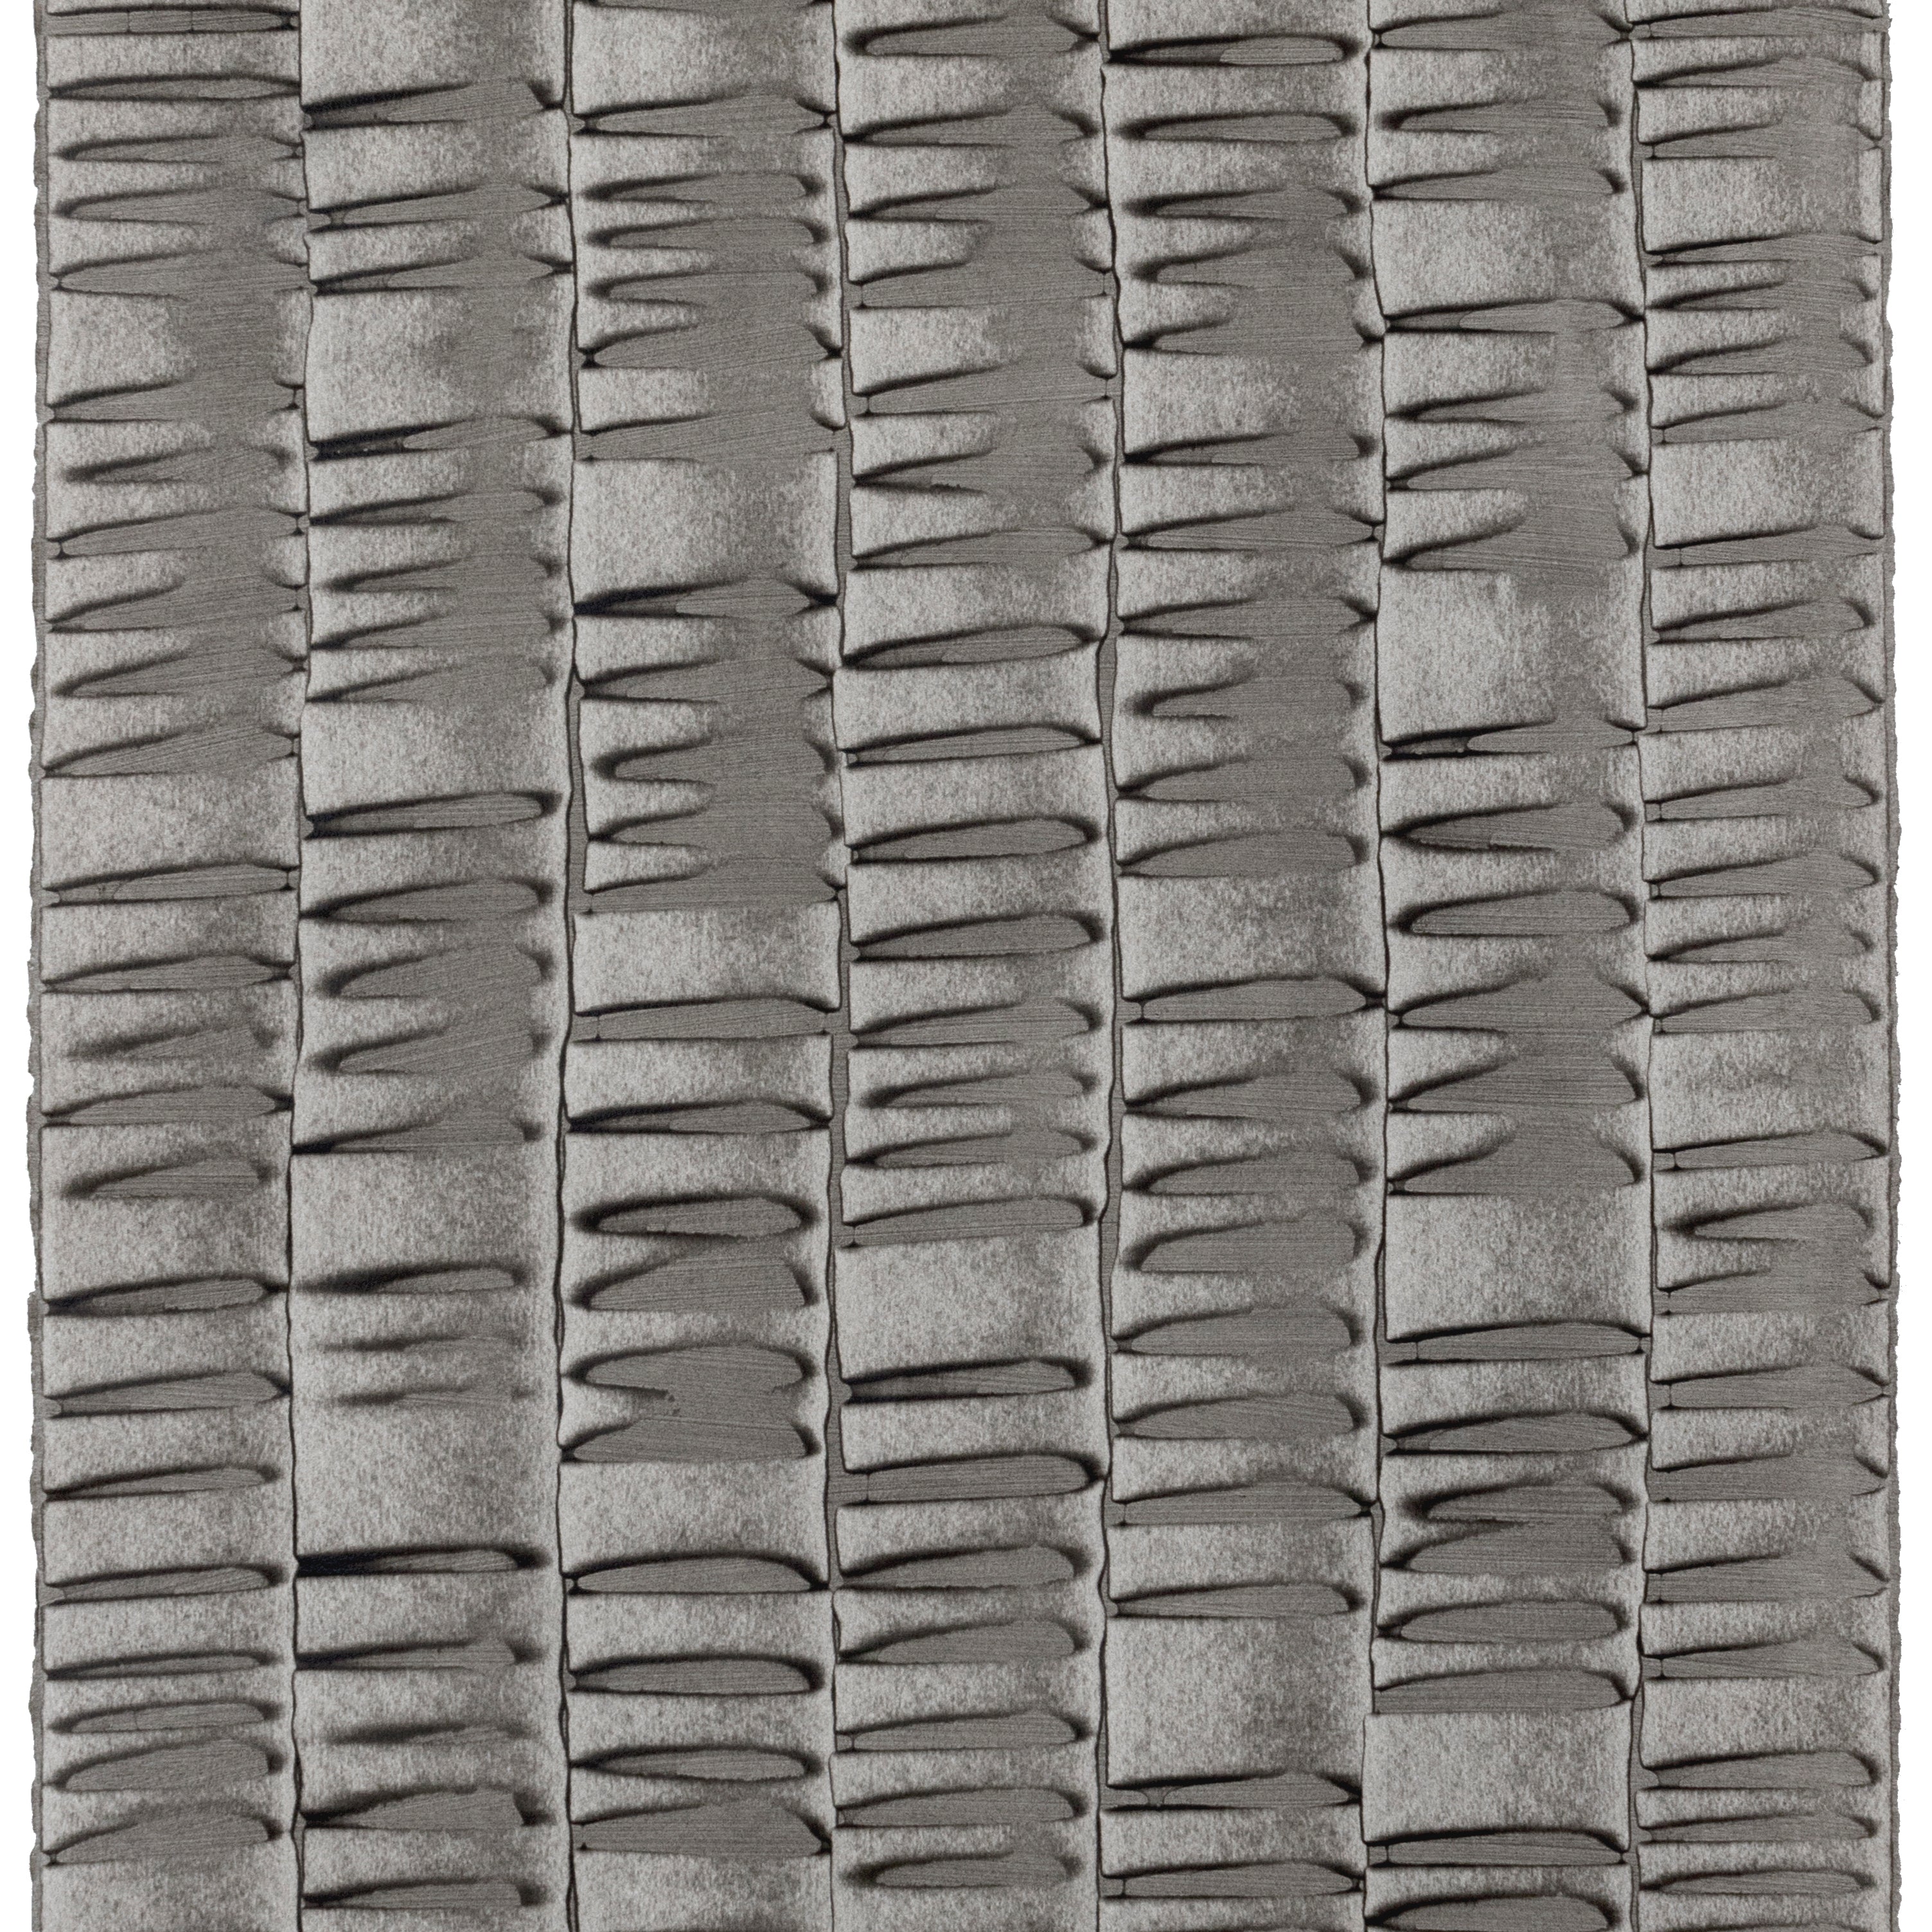 Sheet of hand-painted wallpaper with an undulating ribbon pattern in charcoal.